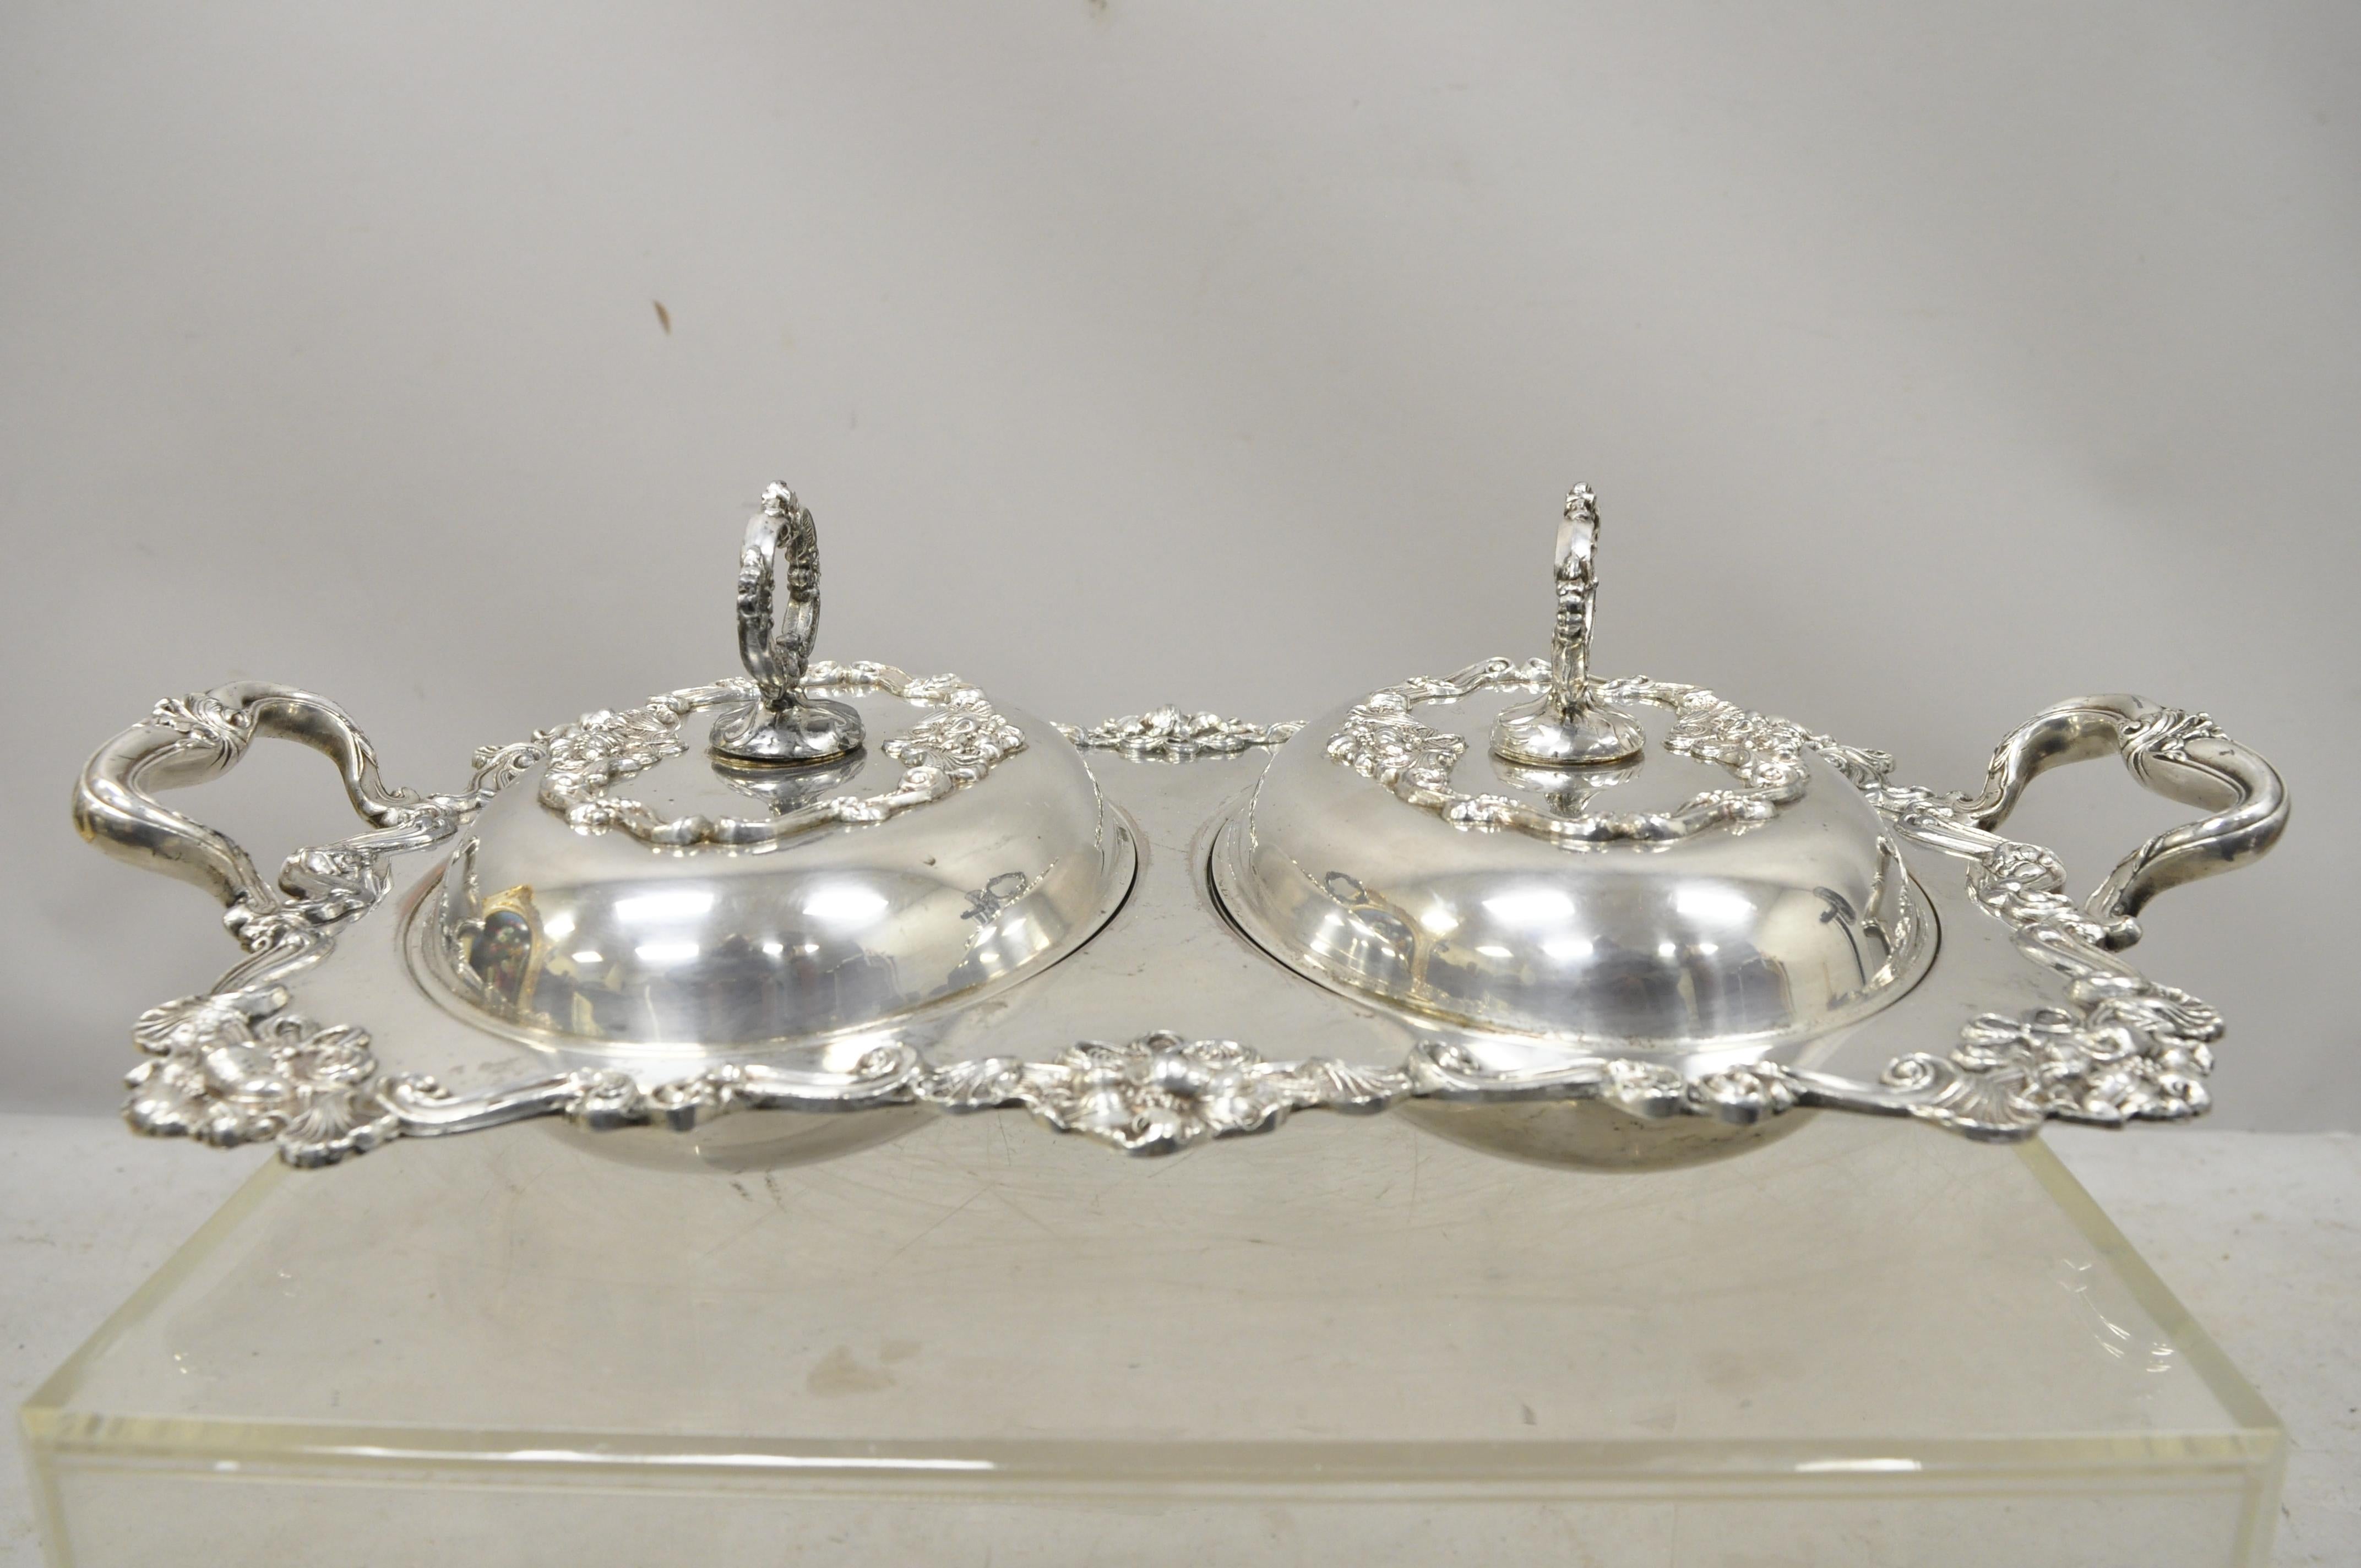 French Art Nouveau Silver Plate Double Side Serving Dish Platter Tray with Lids 7